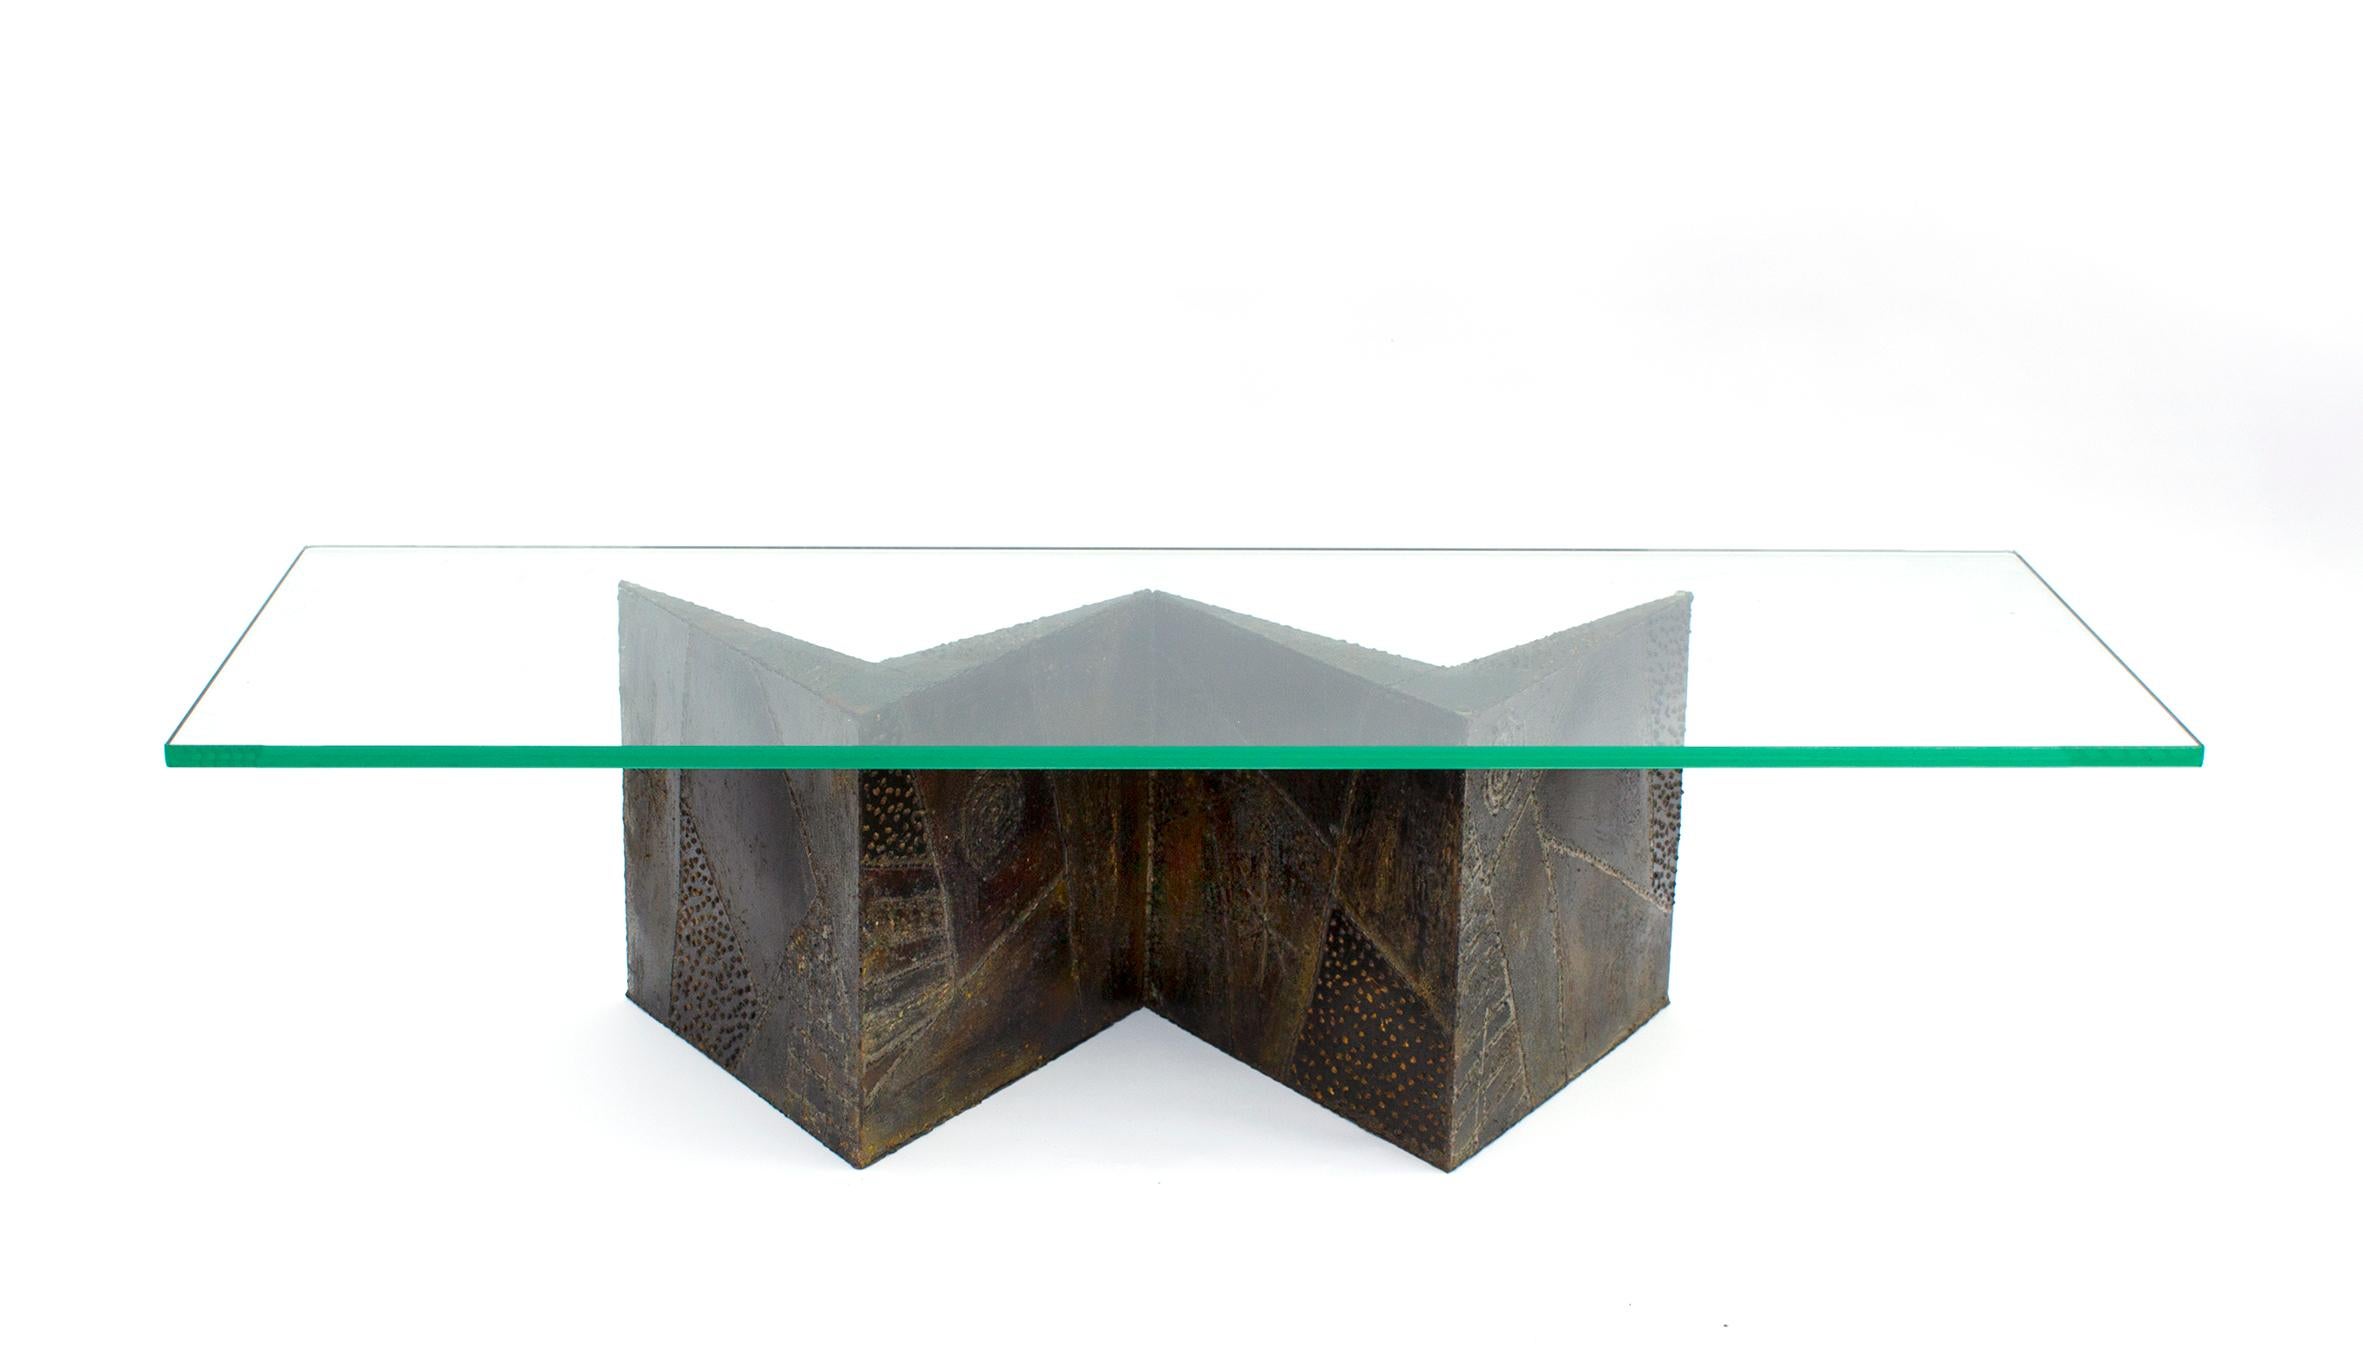 Welded and patinated steel PE-11 coffee table by Paul Evans Studio for Directional, 1966. Table is in excellent original condition with a beautiful patina.